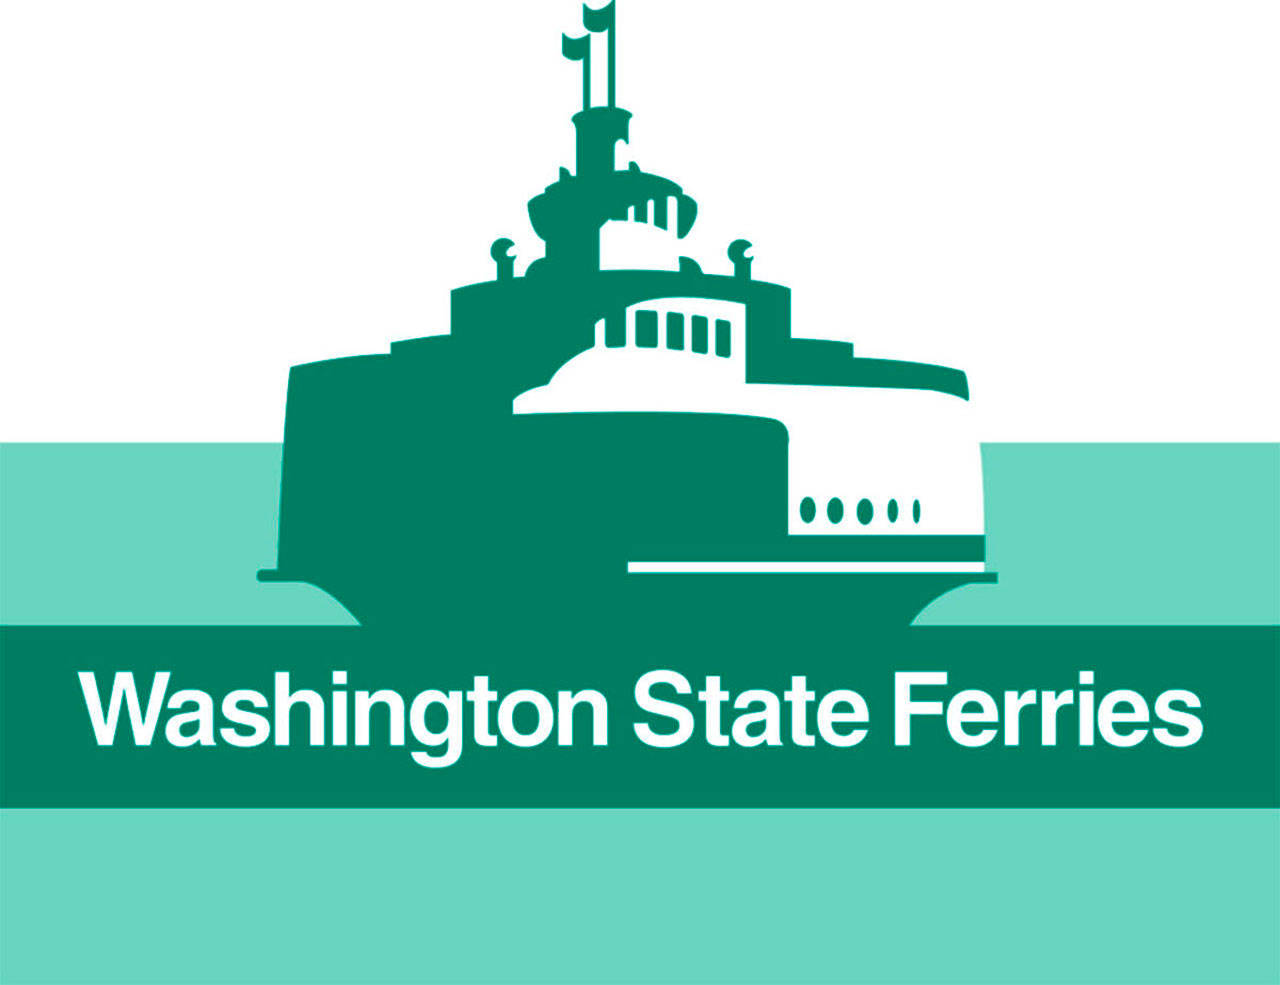 Big crowds, adjusted ferry schedules expected this Labor Day weekend